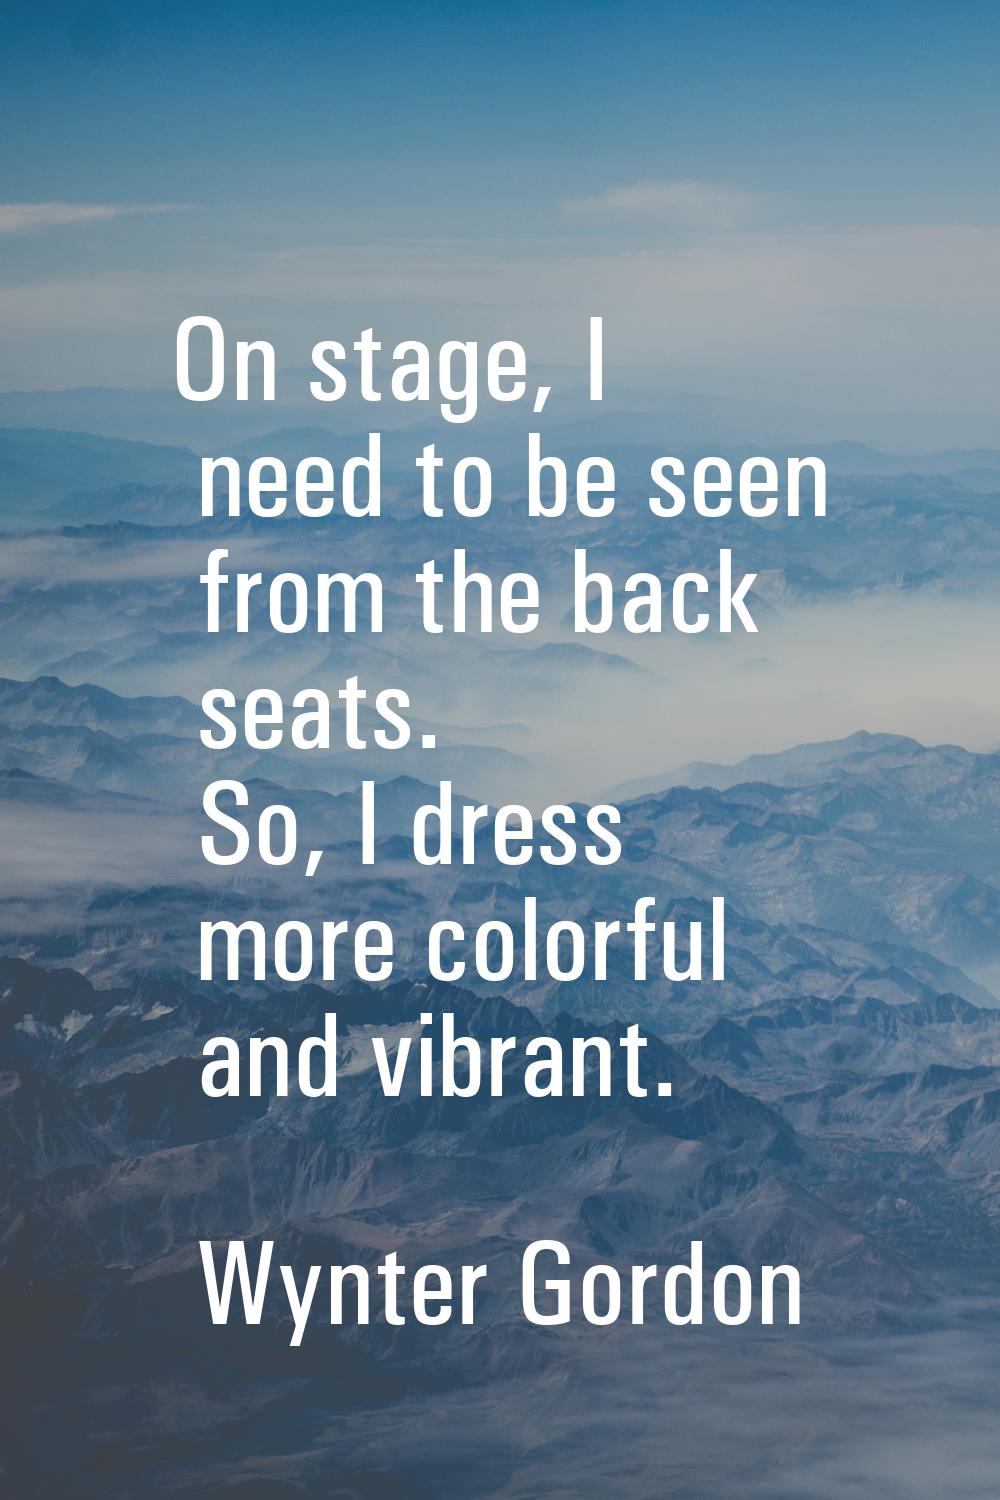 On stage, I need to be seen from the back seats. So, I dress more colorful and vibrant.